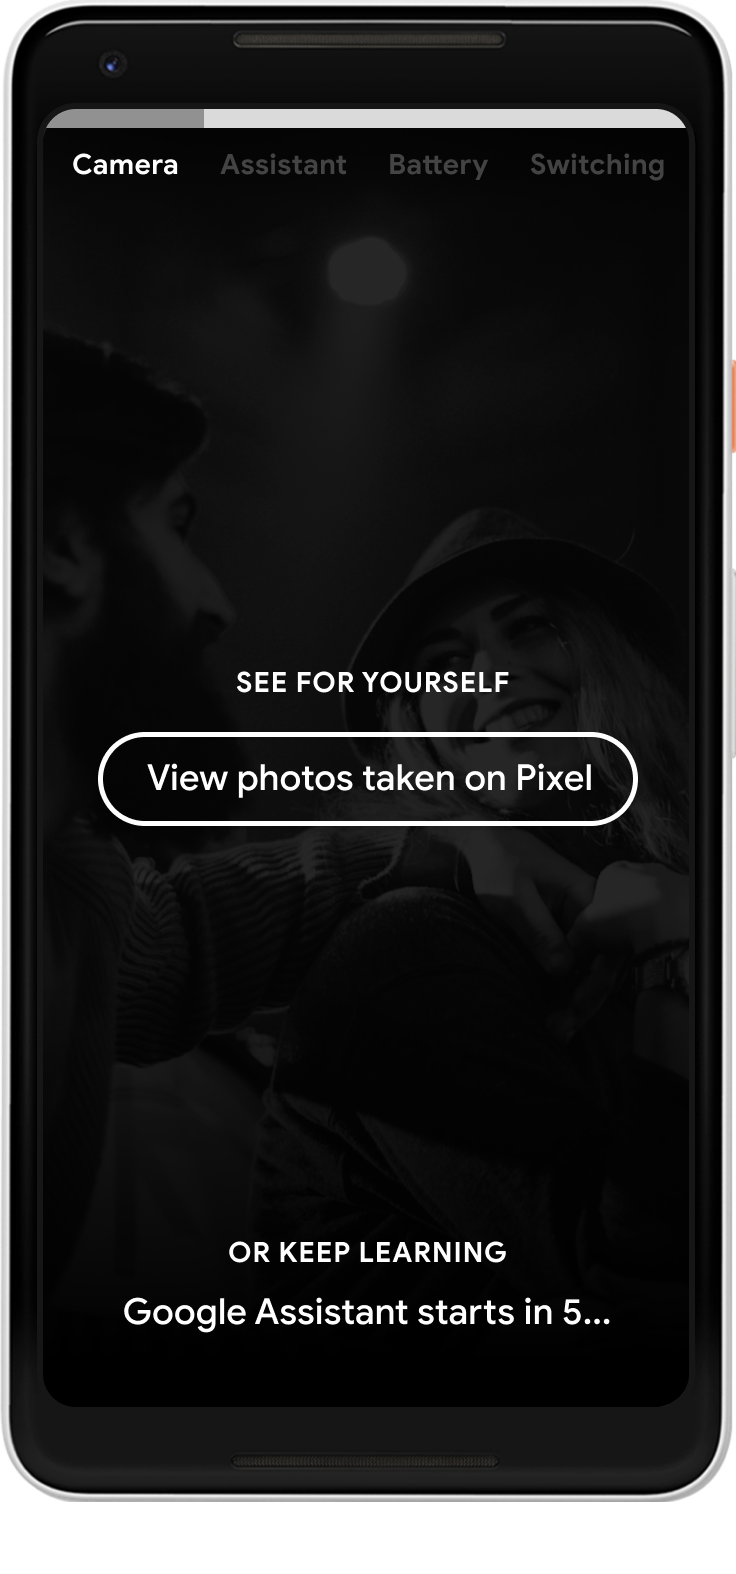 CTA to 'View photos taken on Pixel' with alt option to keep watching for the next video